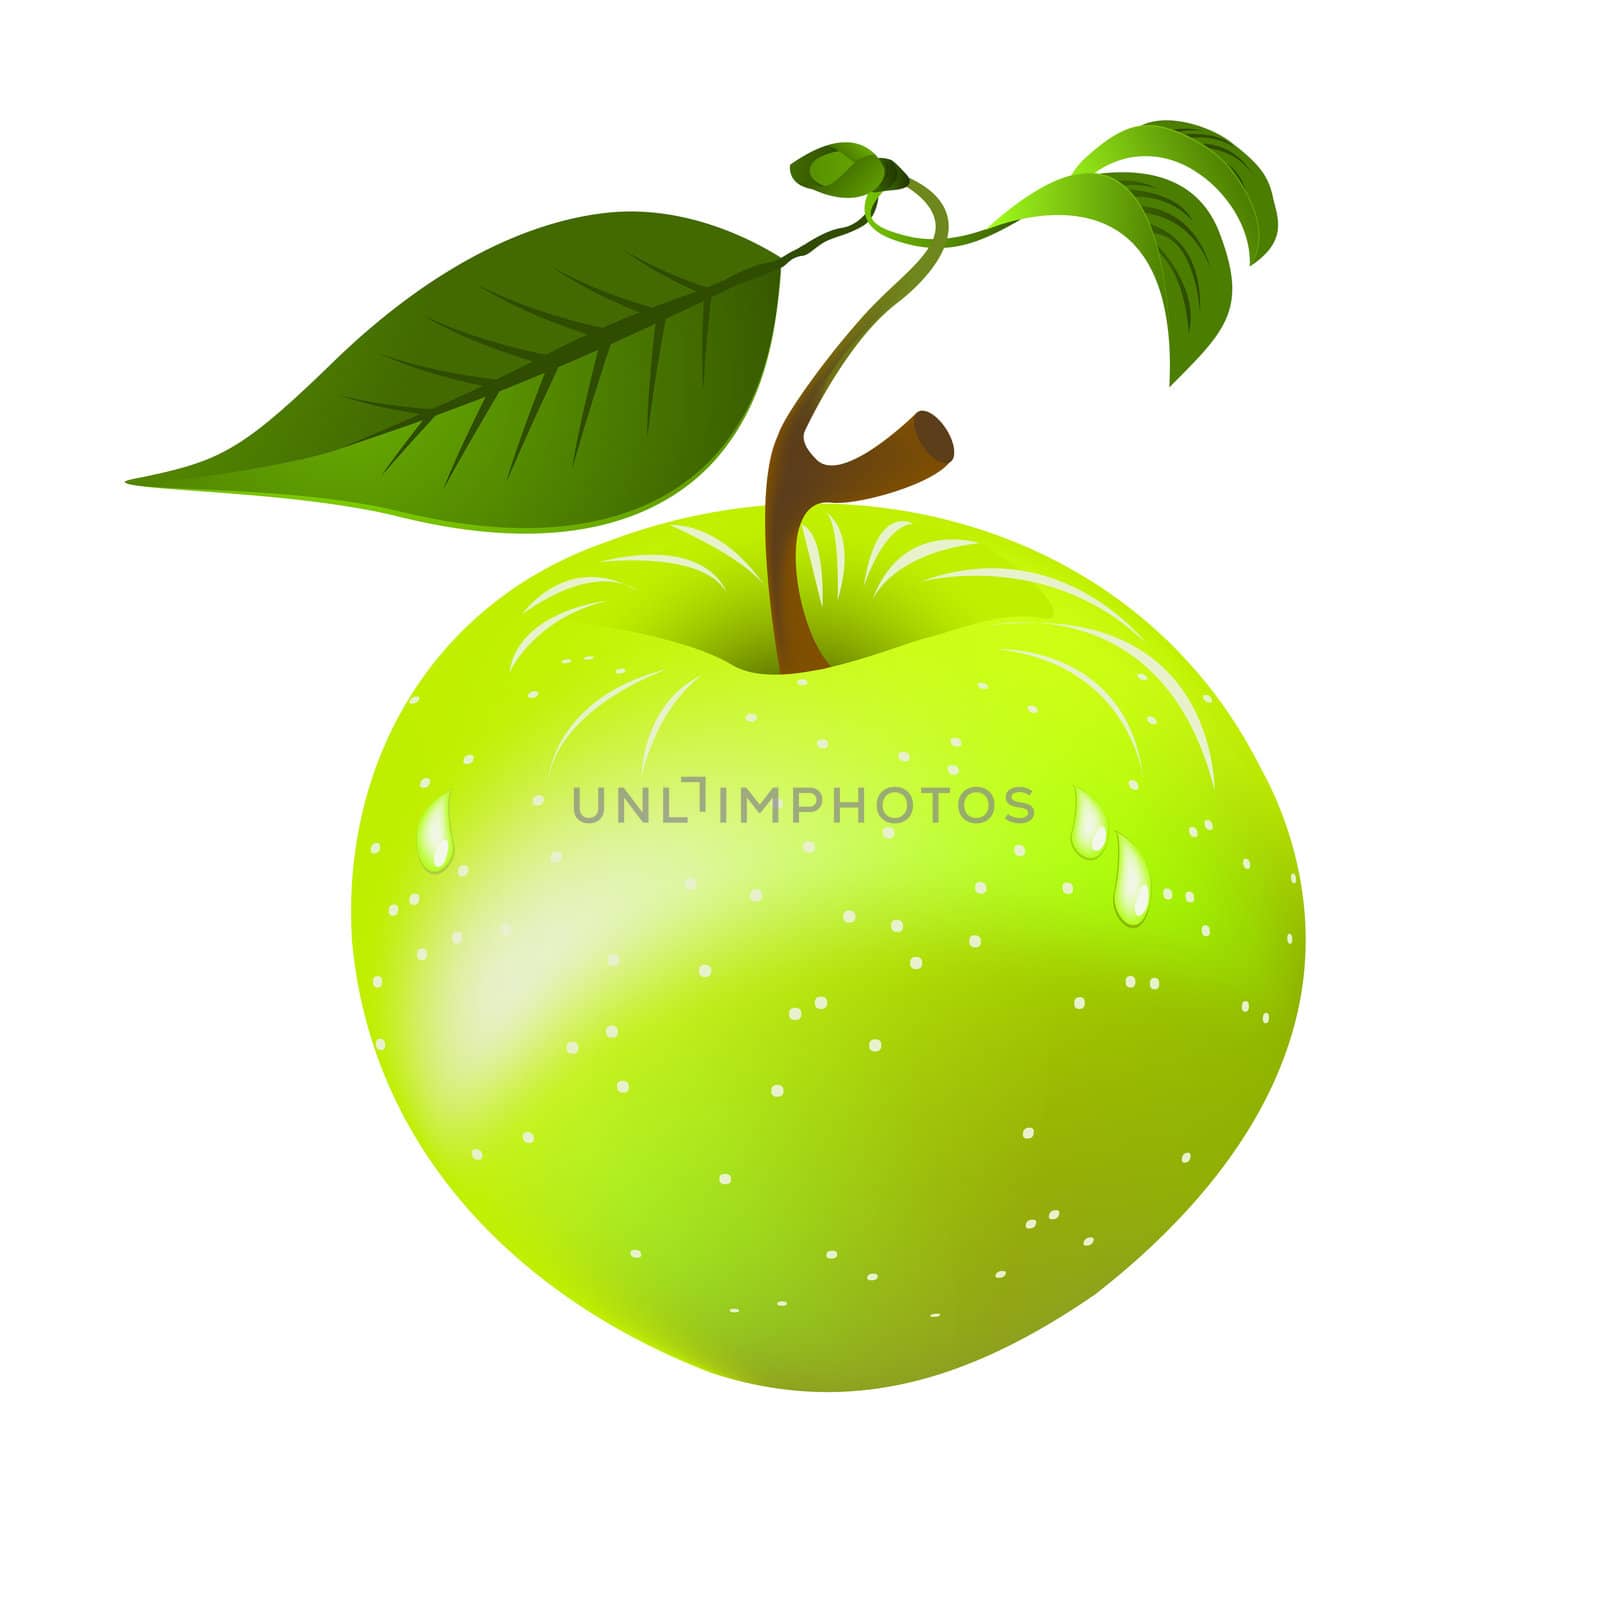 Fresh green apple with leaves